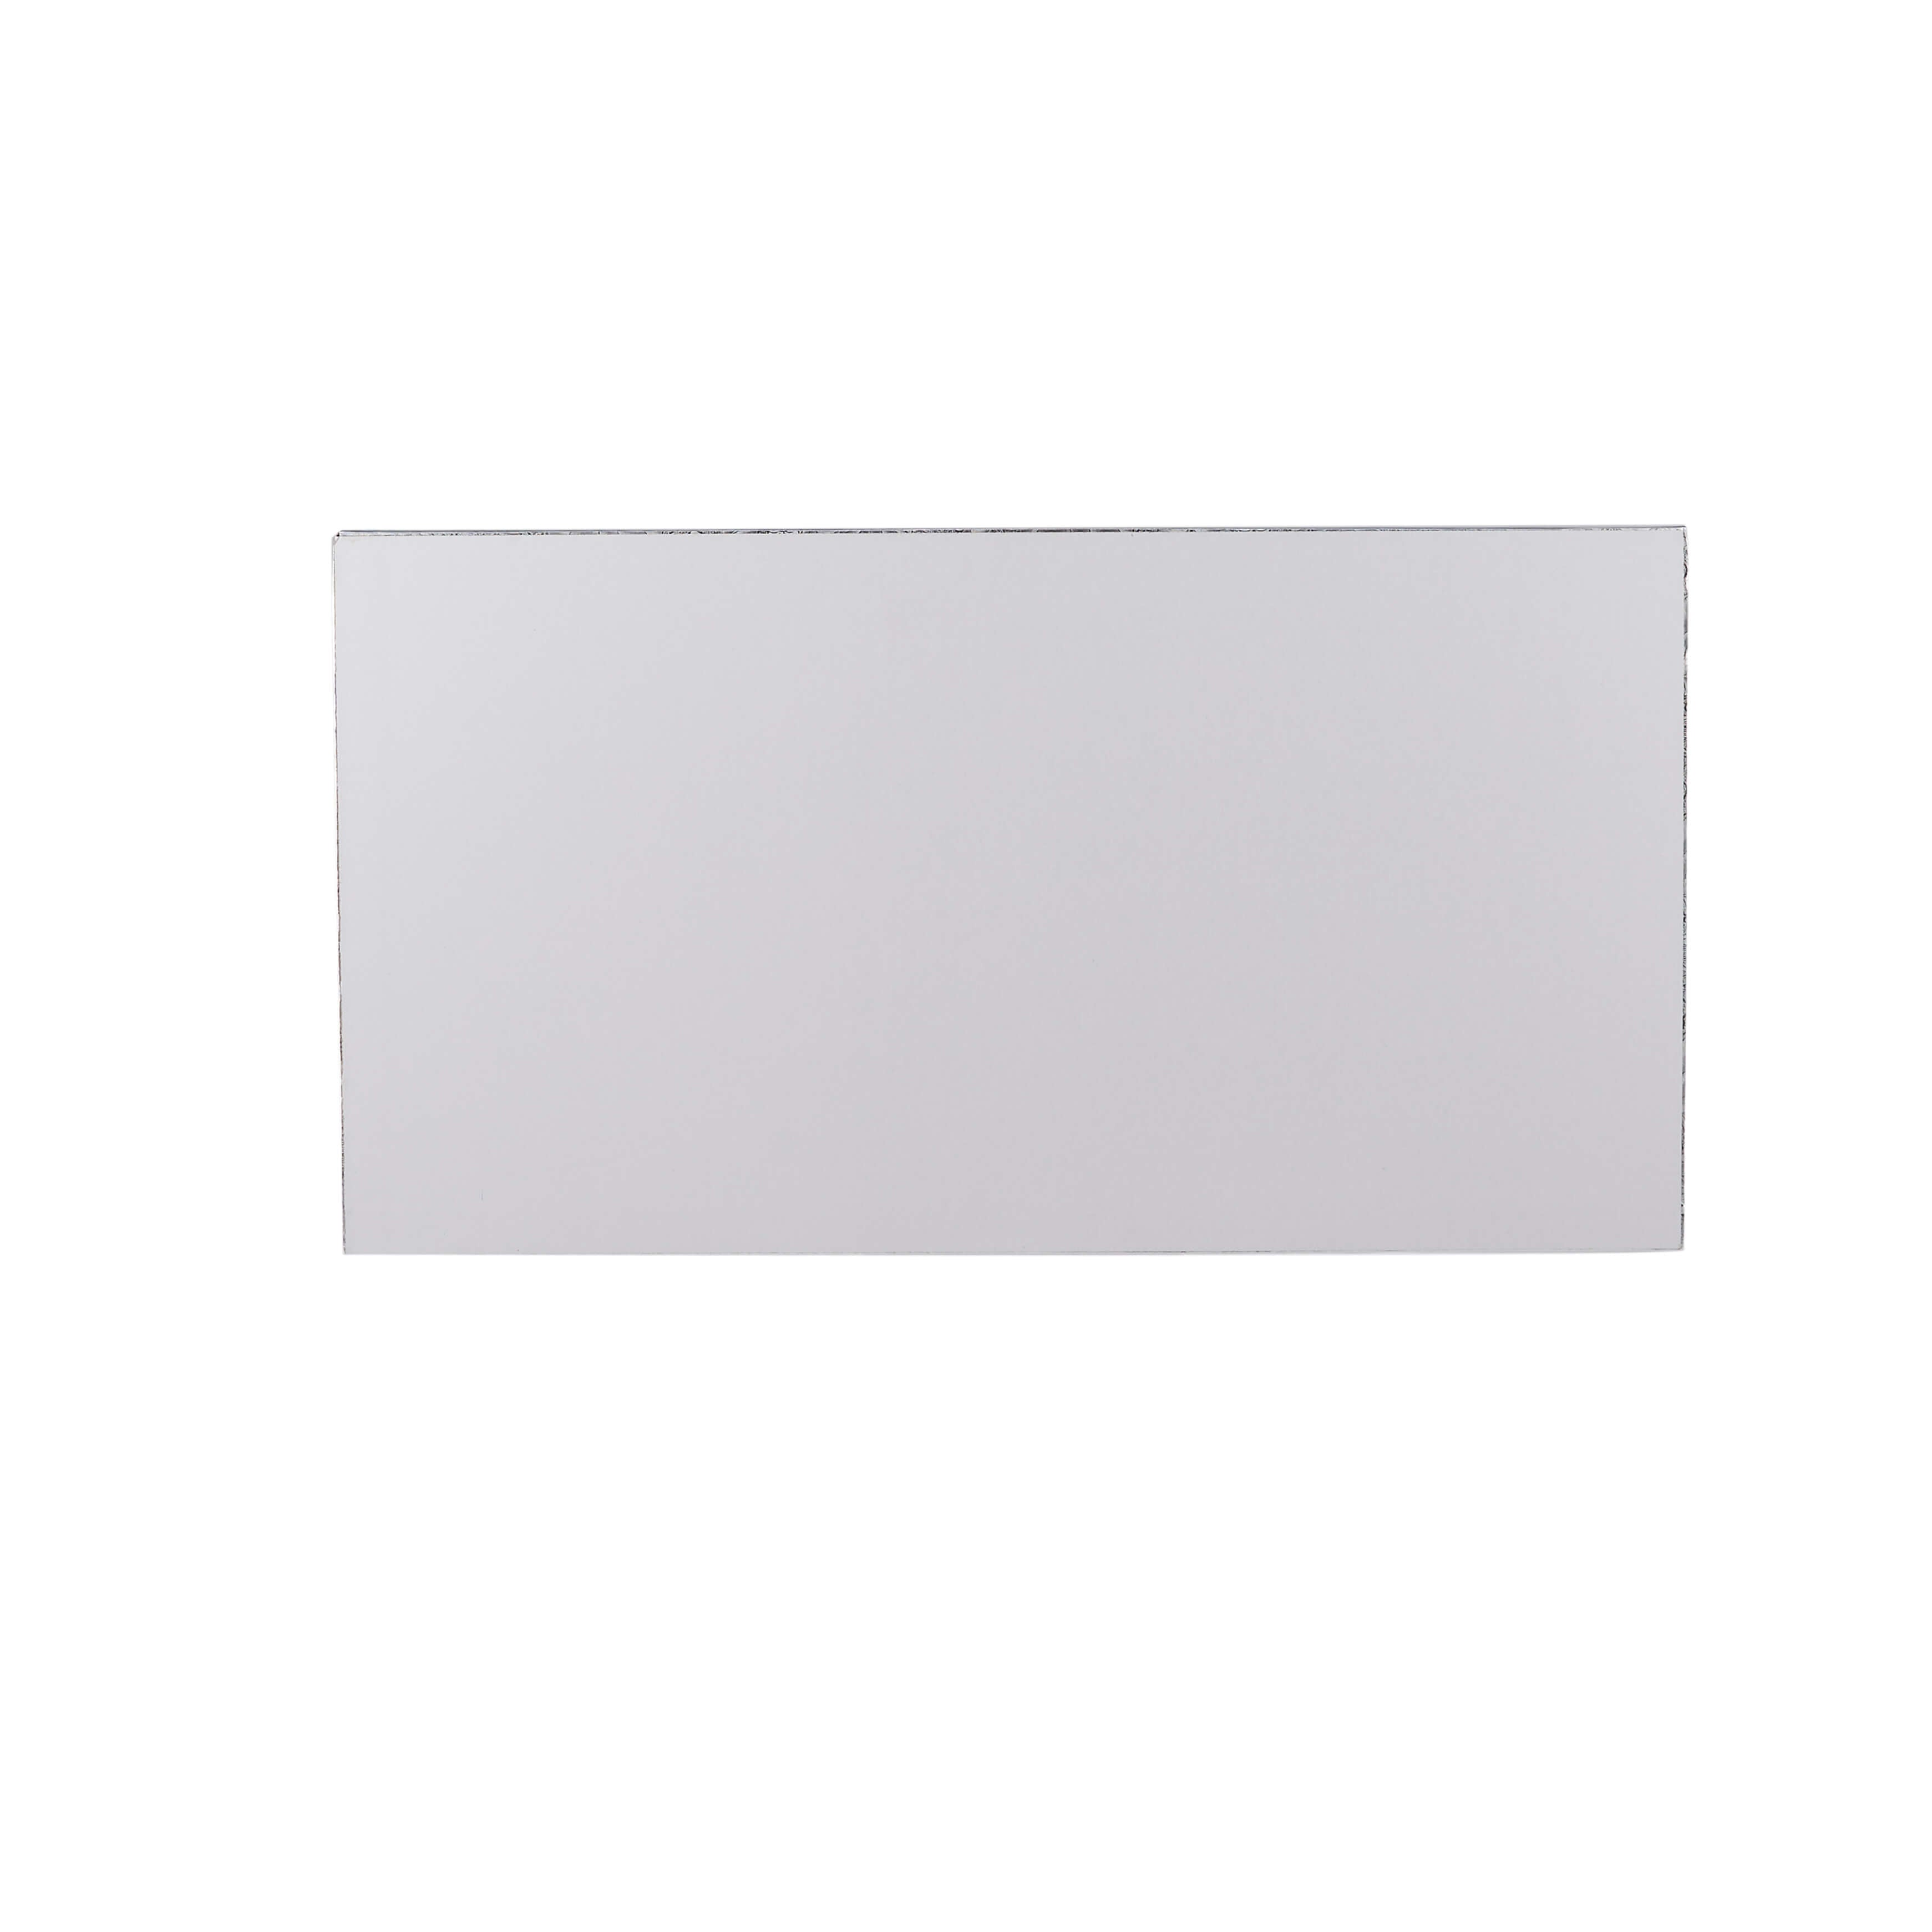 Thick Cake Drum Board Rectangle Silver 60x30 cm 12mm - Hotpack Global